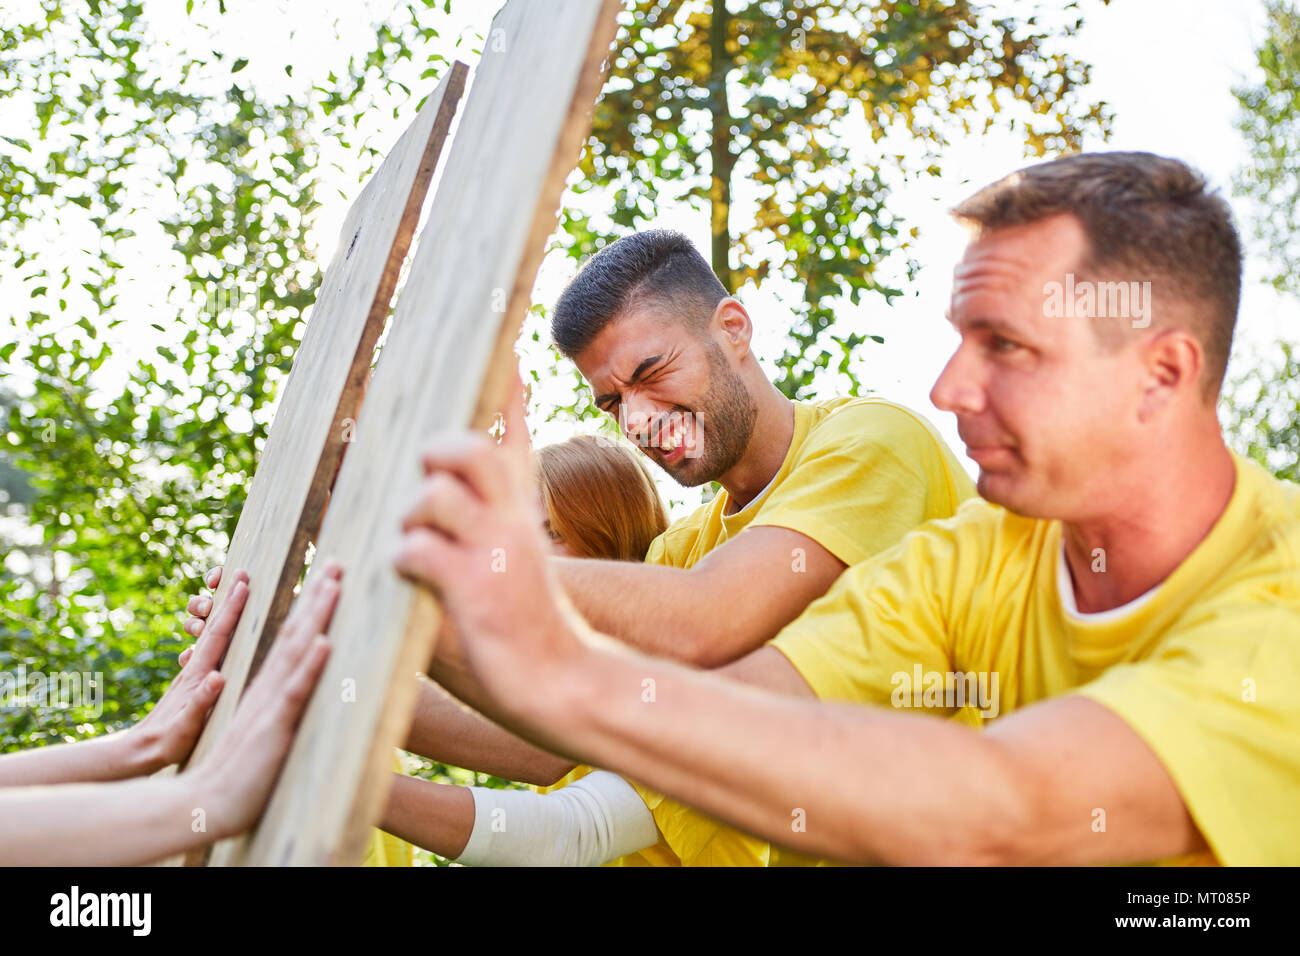 Young team trains confrontation and strength in a teamwork workshop Stock Photo